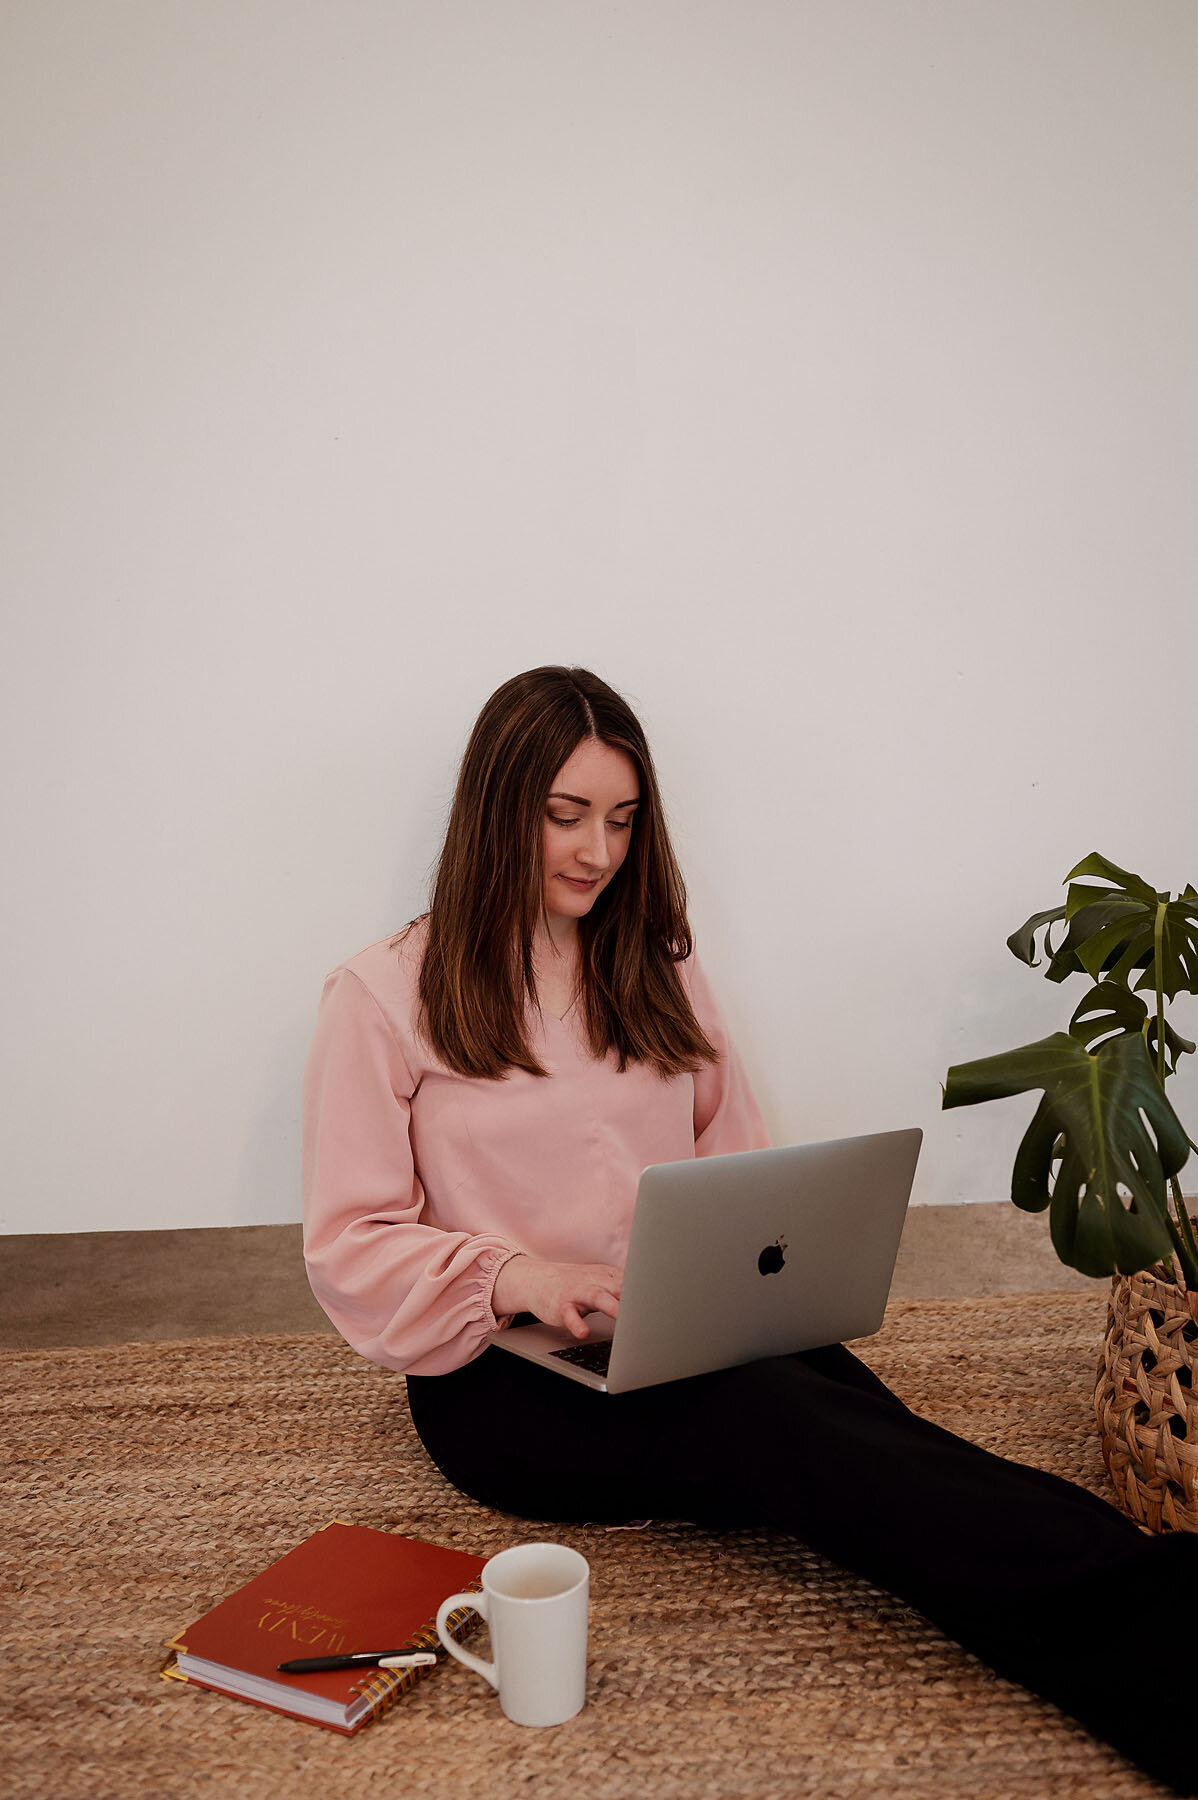 Lifestyle portrait of woman sitting on ground typing on laptop